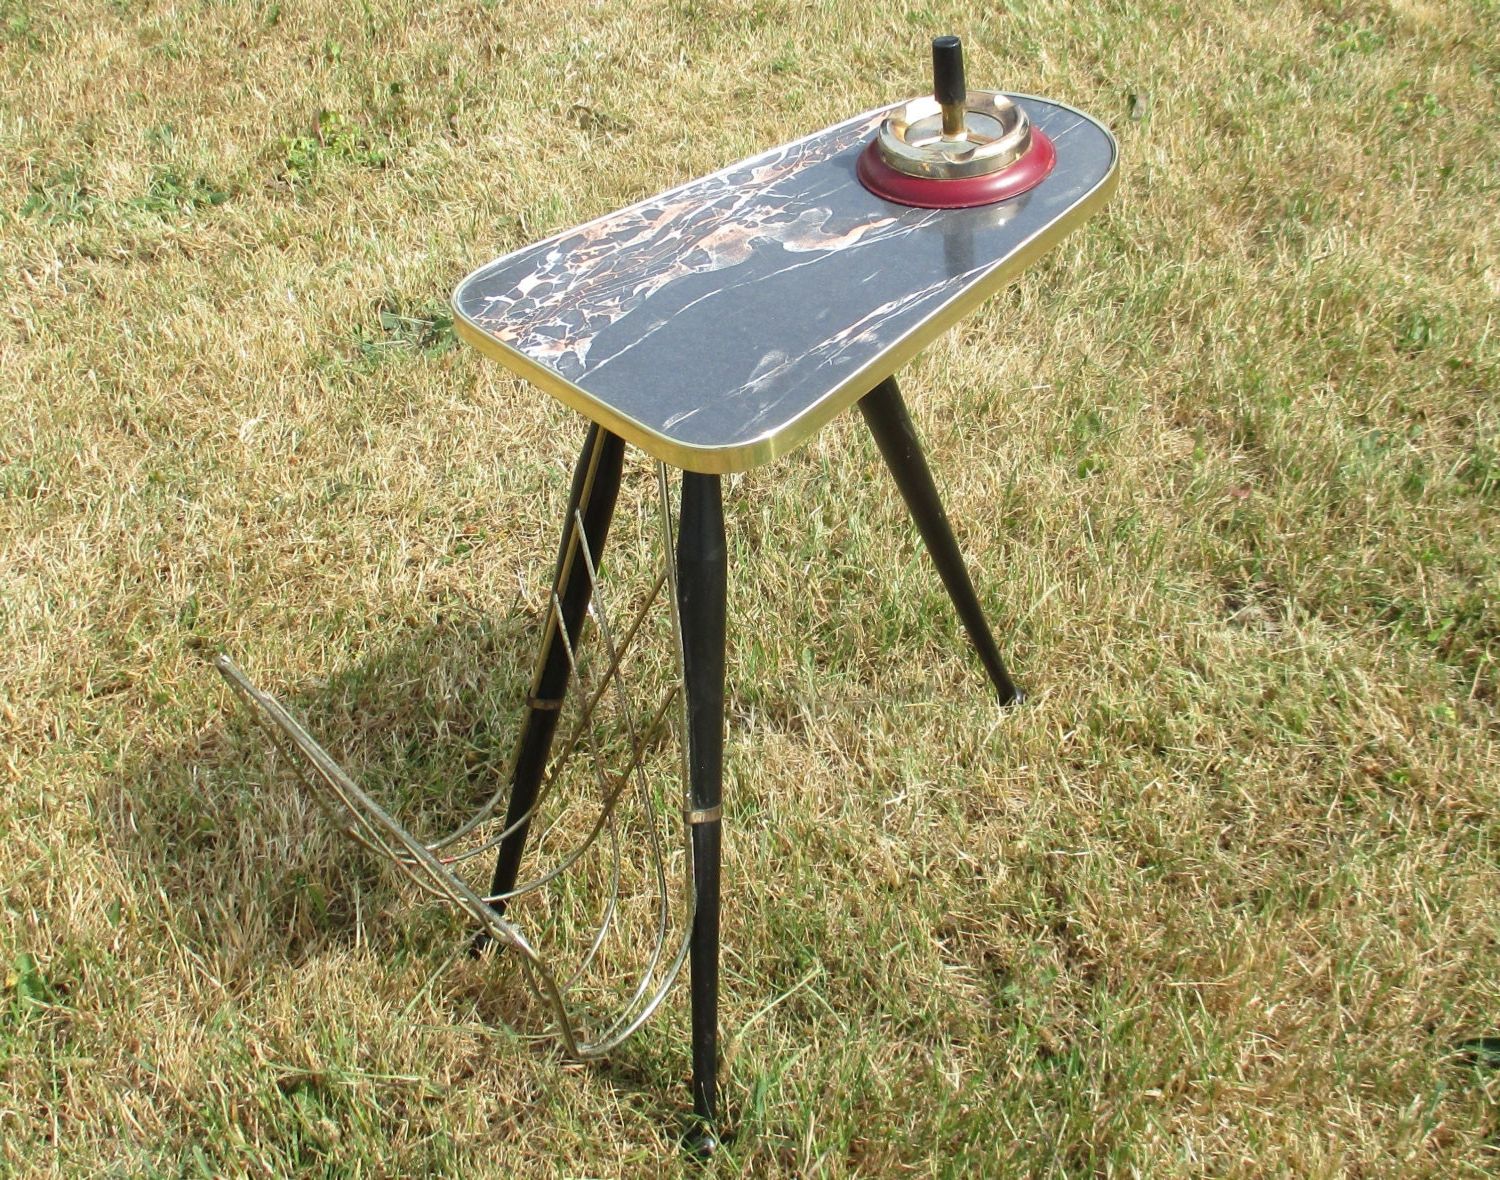 Retro Vintage Tripod Coffee Table Side Table Ashtray Mid In Recent Coffee Tables With Tripod Legs (Gallery 5 of 20)